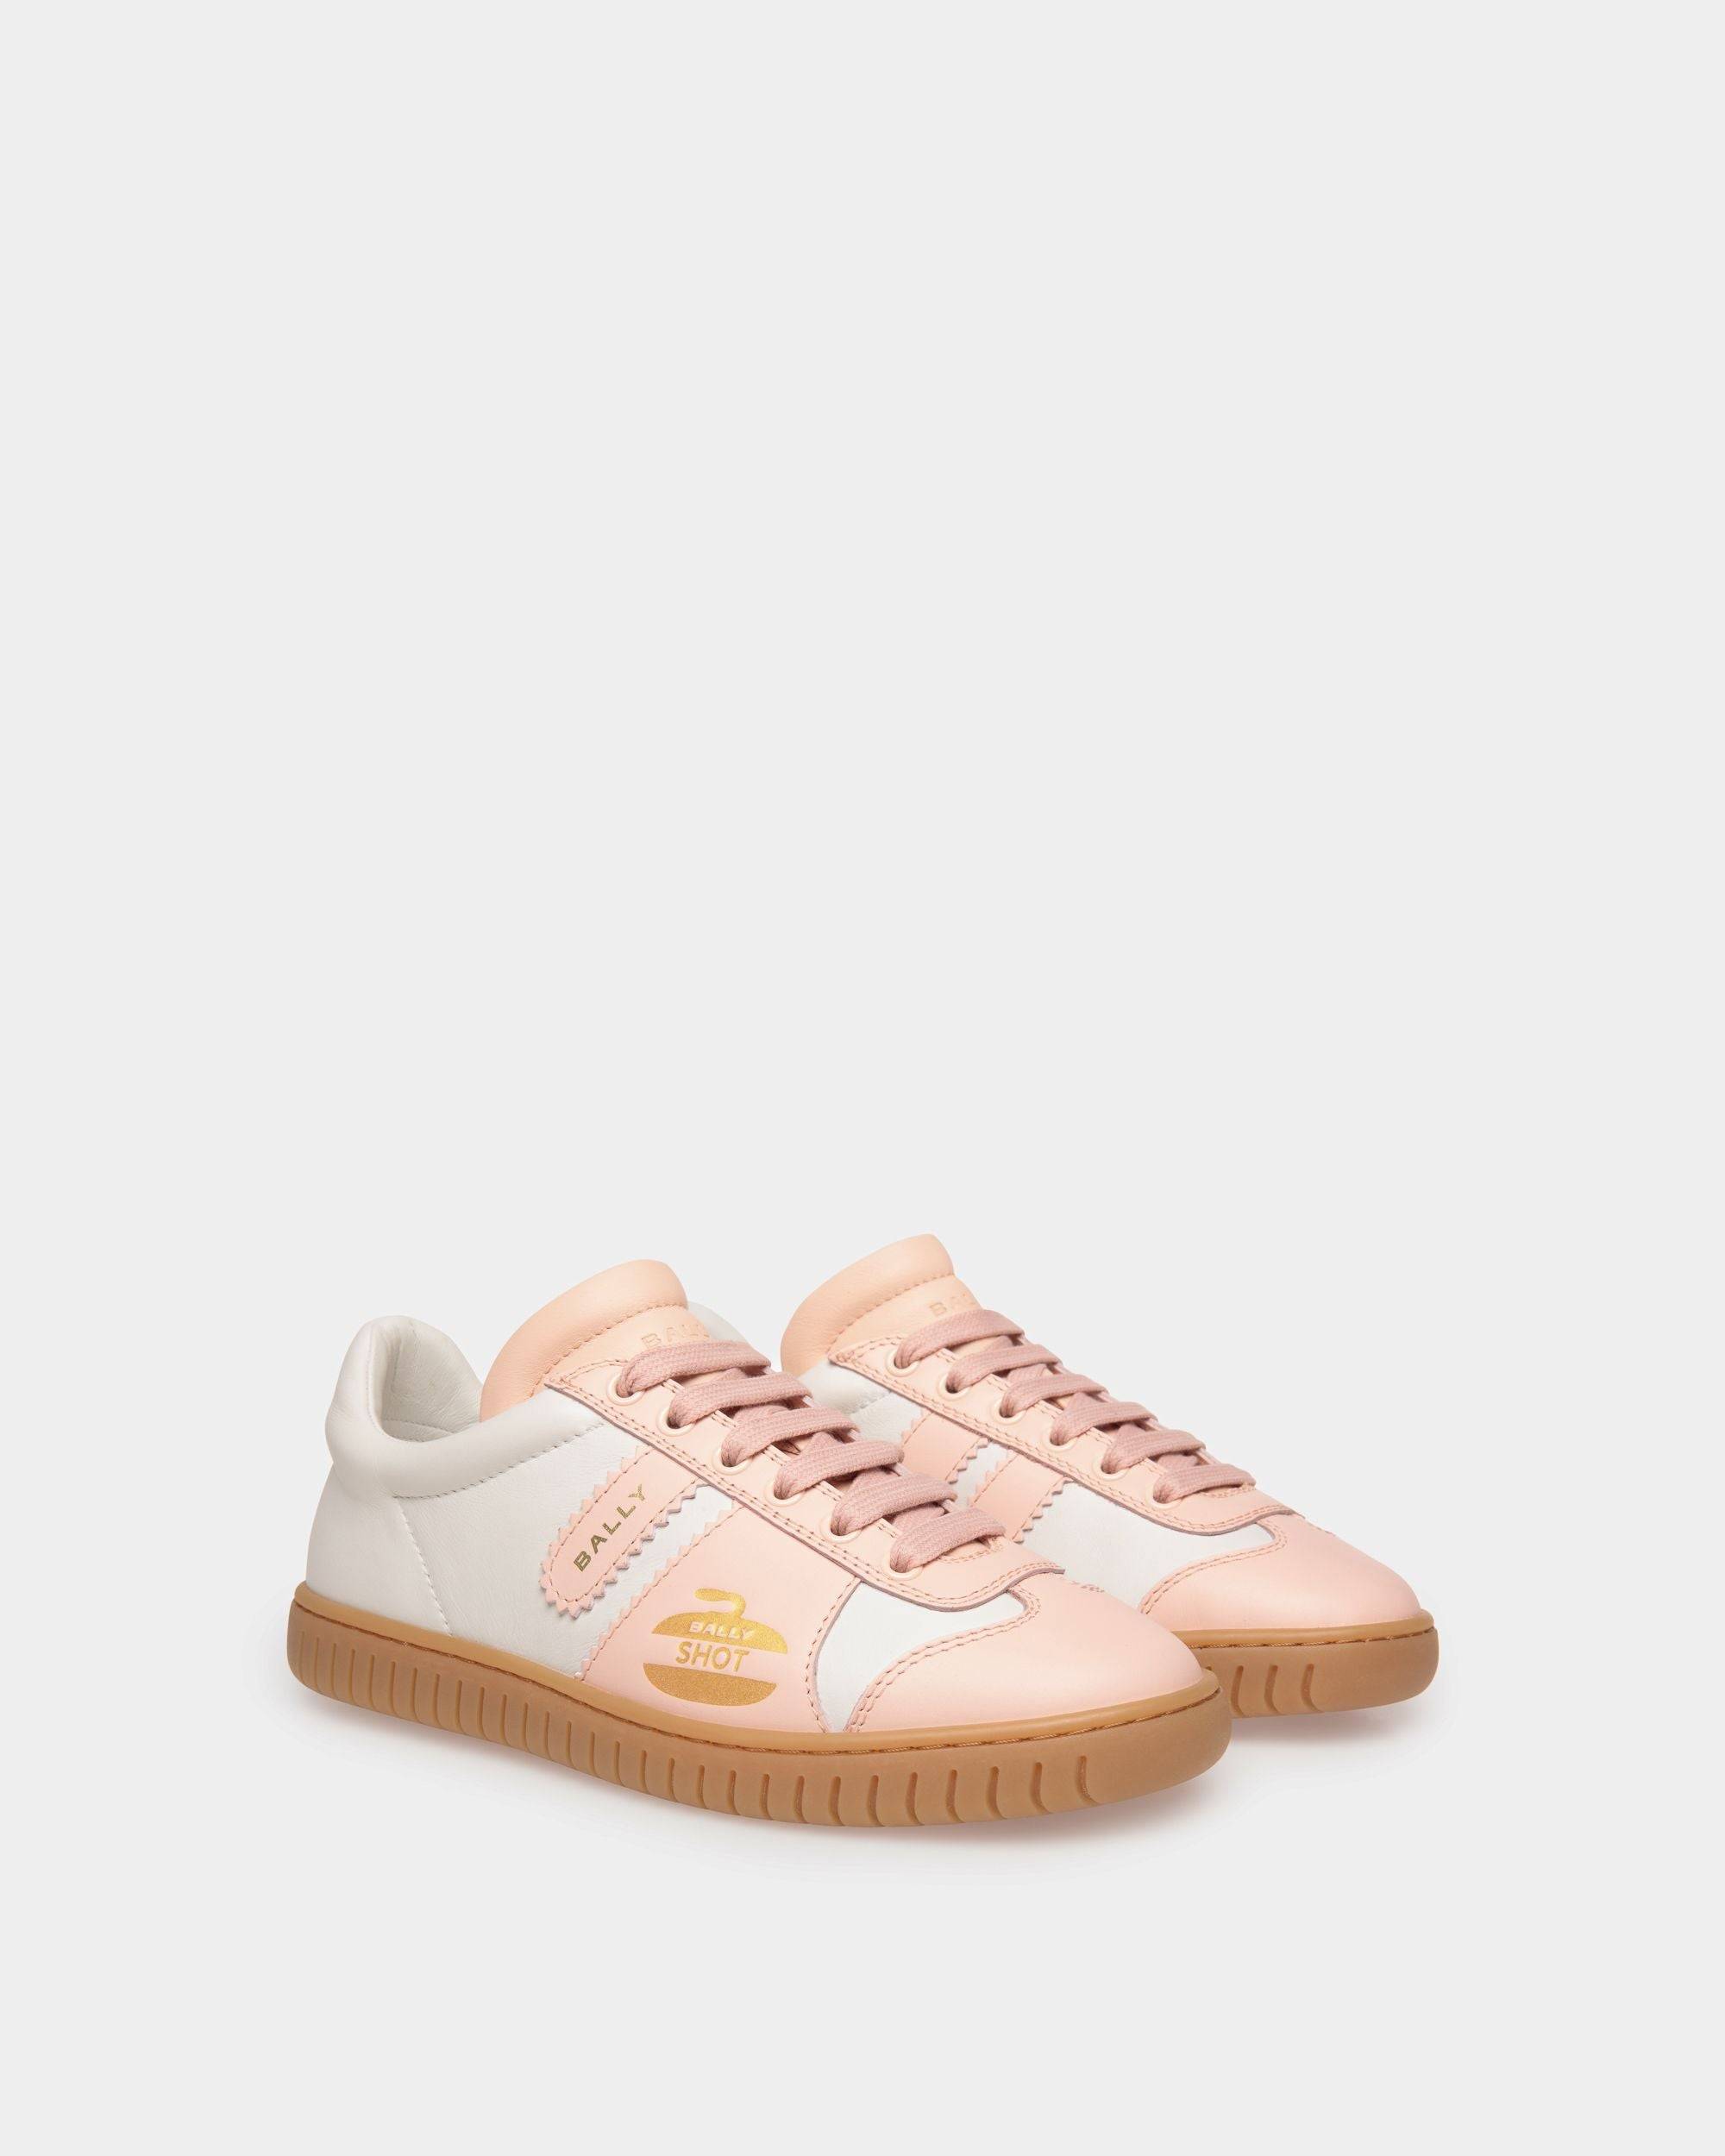 Player | Women's Sneaker in White and Baby Pink Leather | Bally | Still Life 3/4 Front